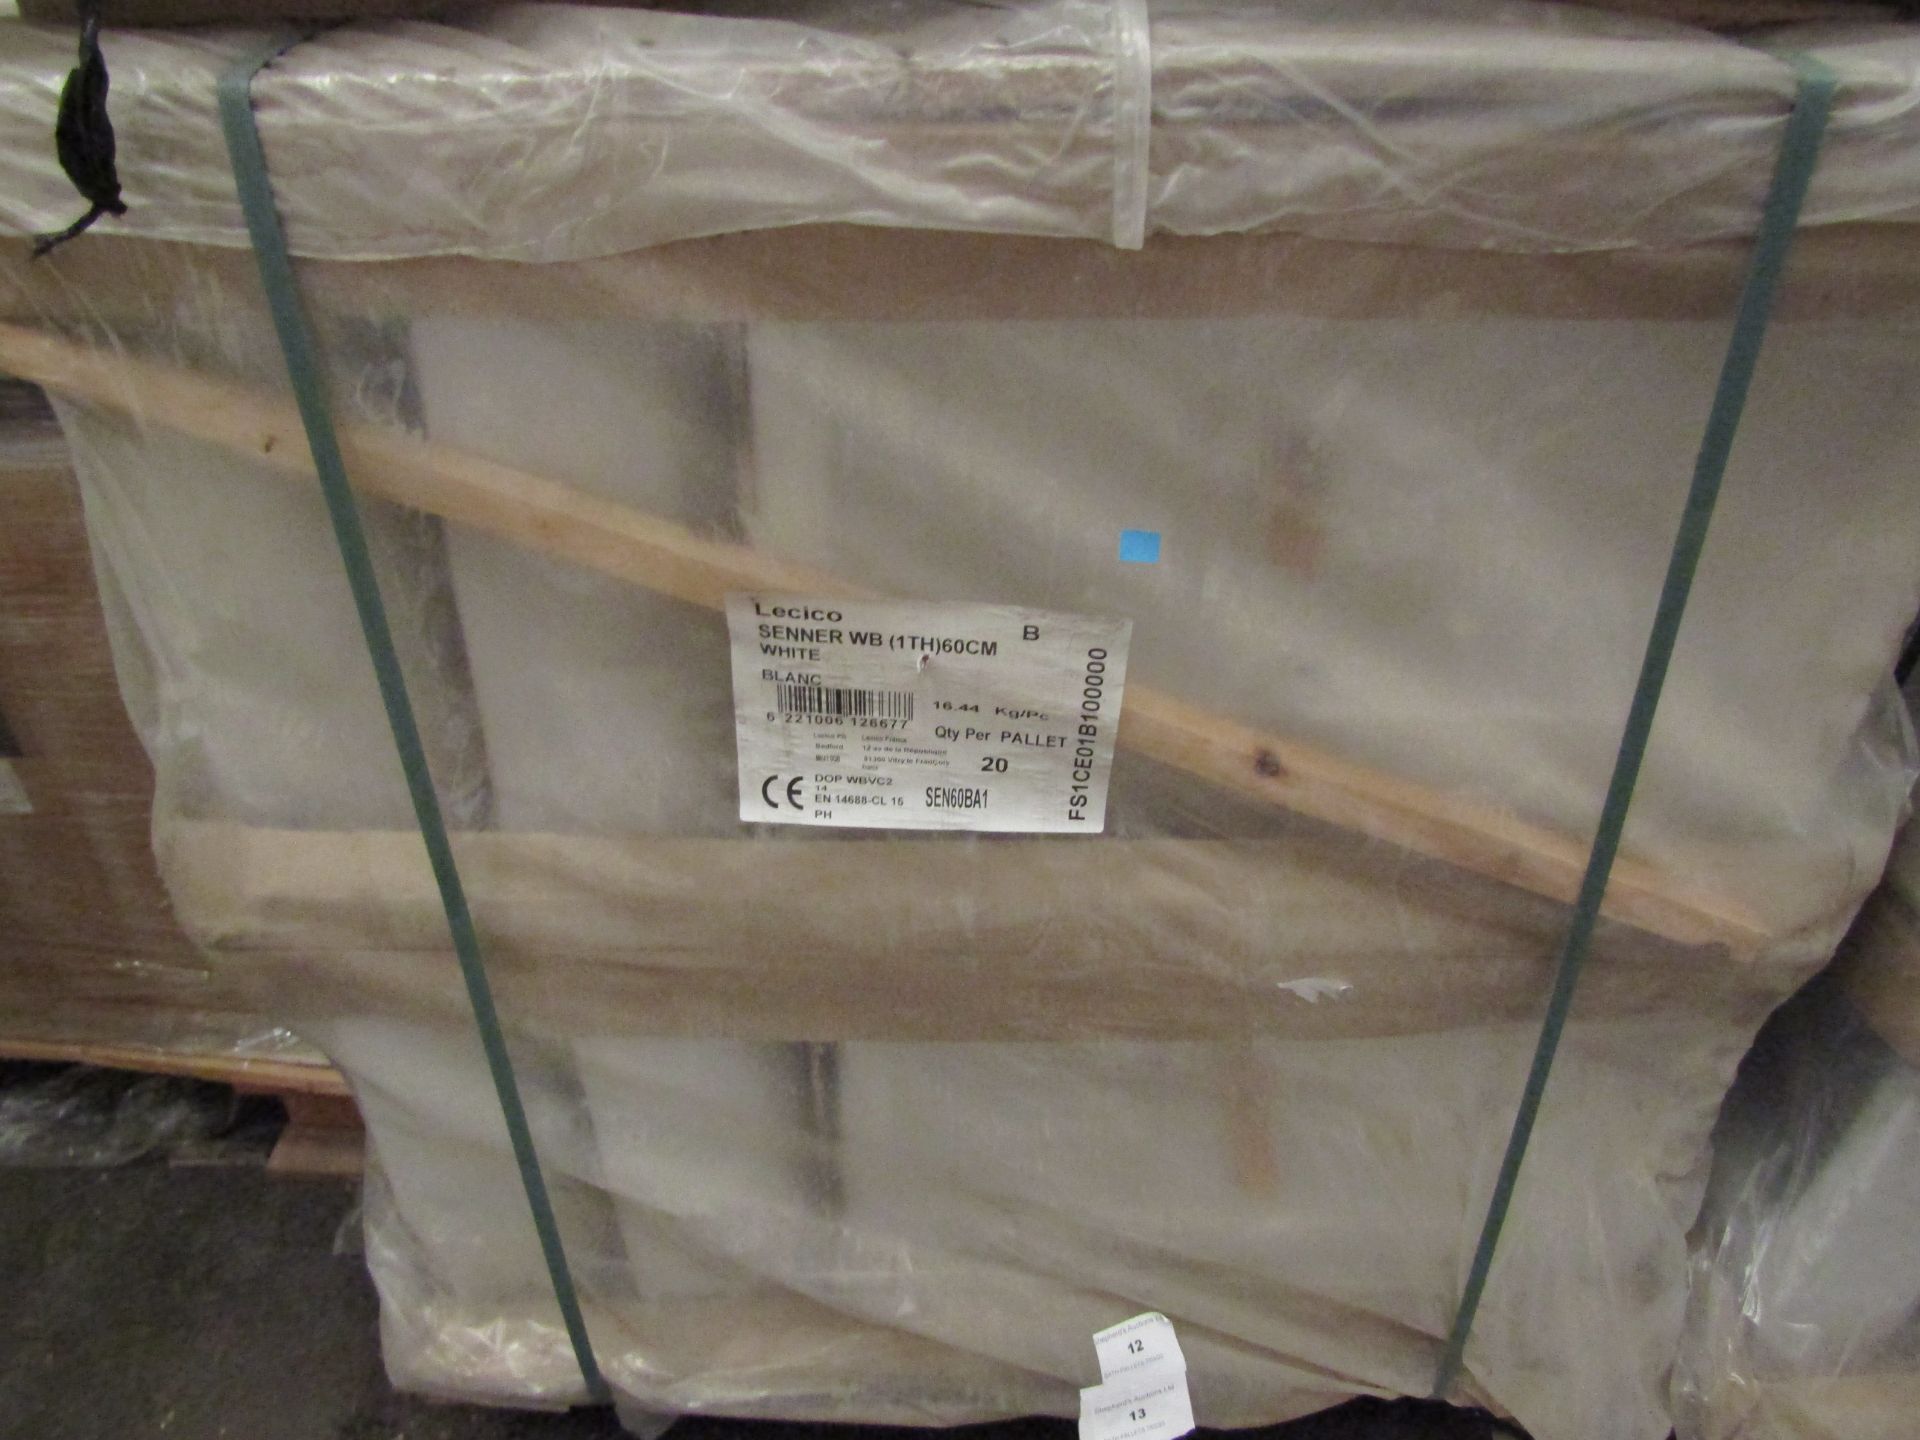 Pallet of approx 20 Lecico Senner 1 tap hole 60cm basins, new